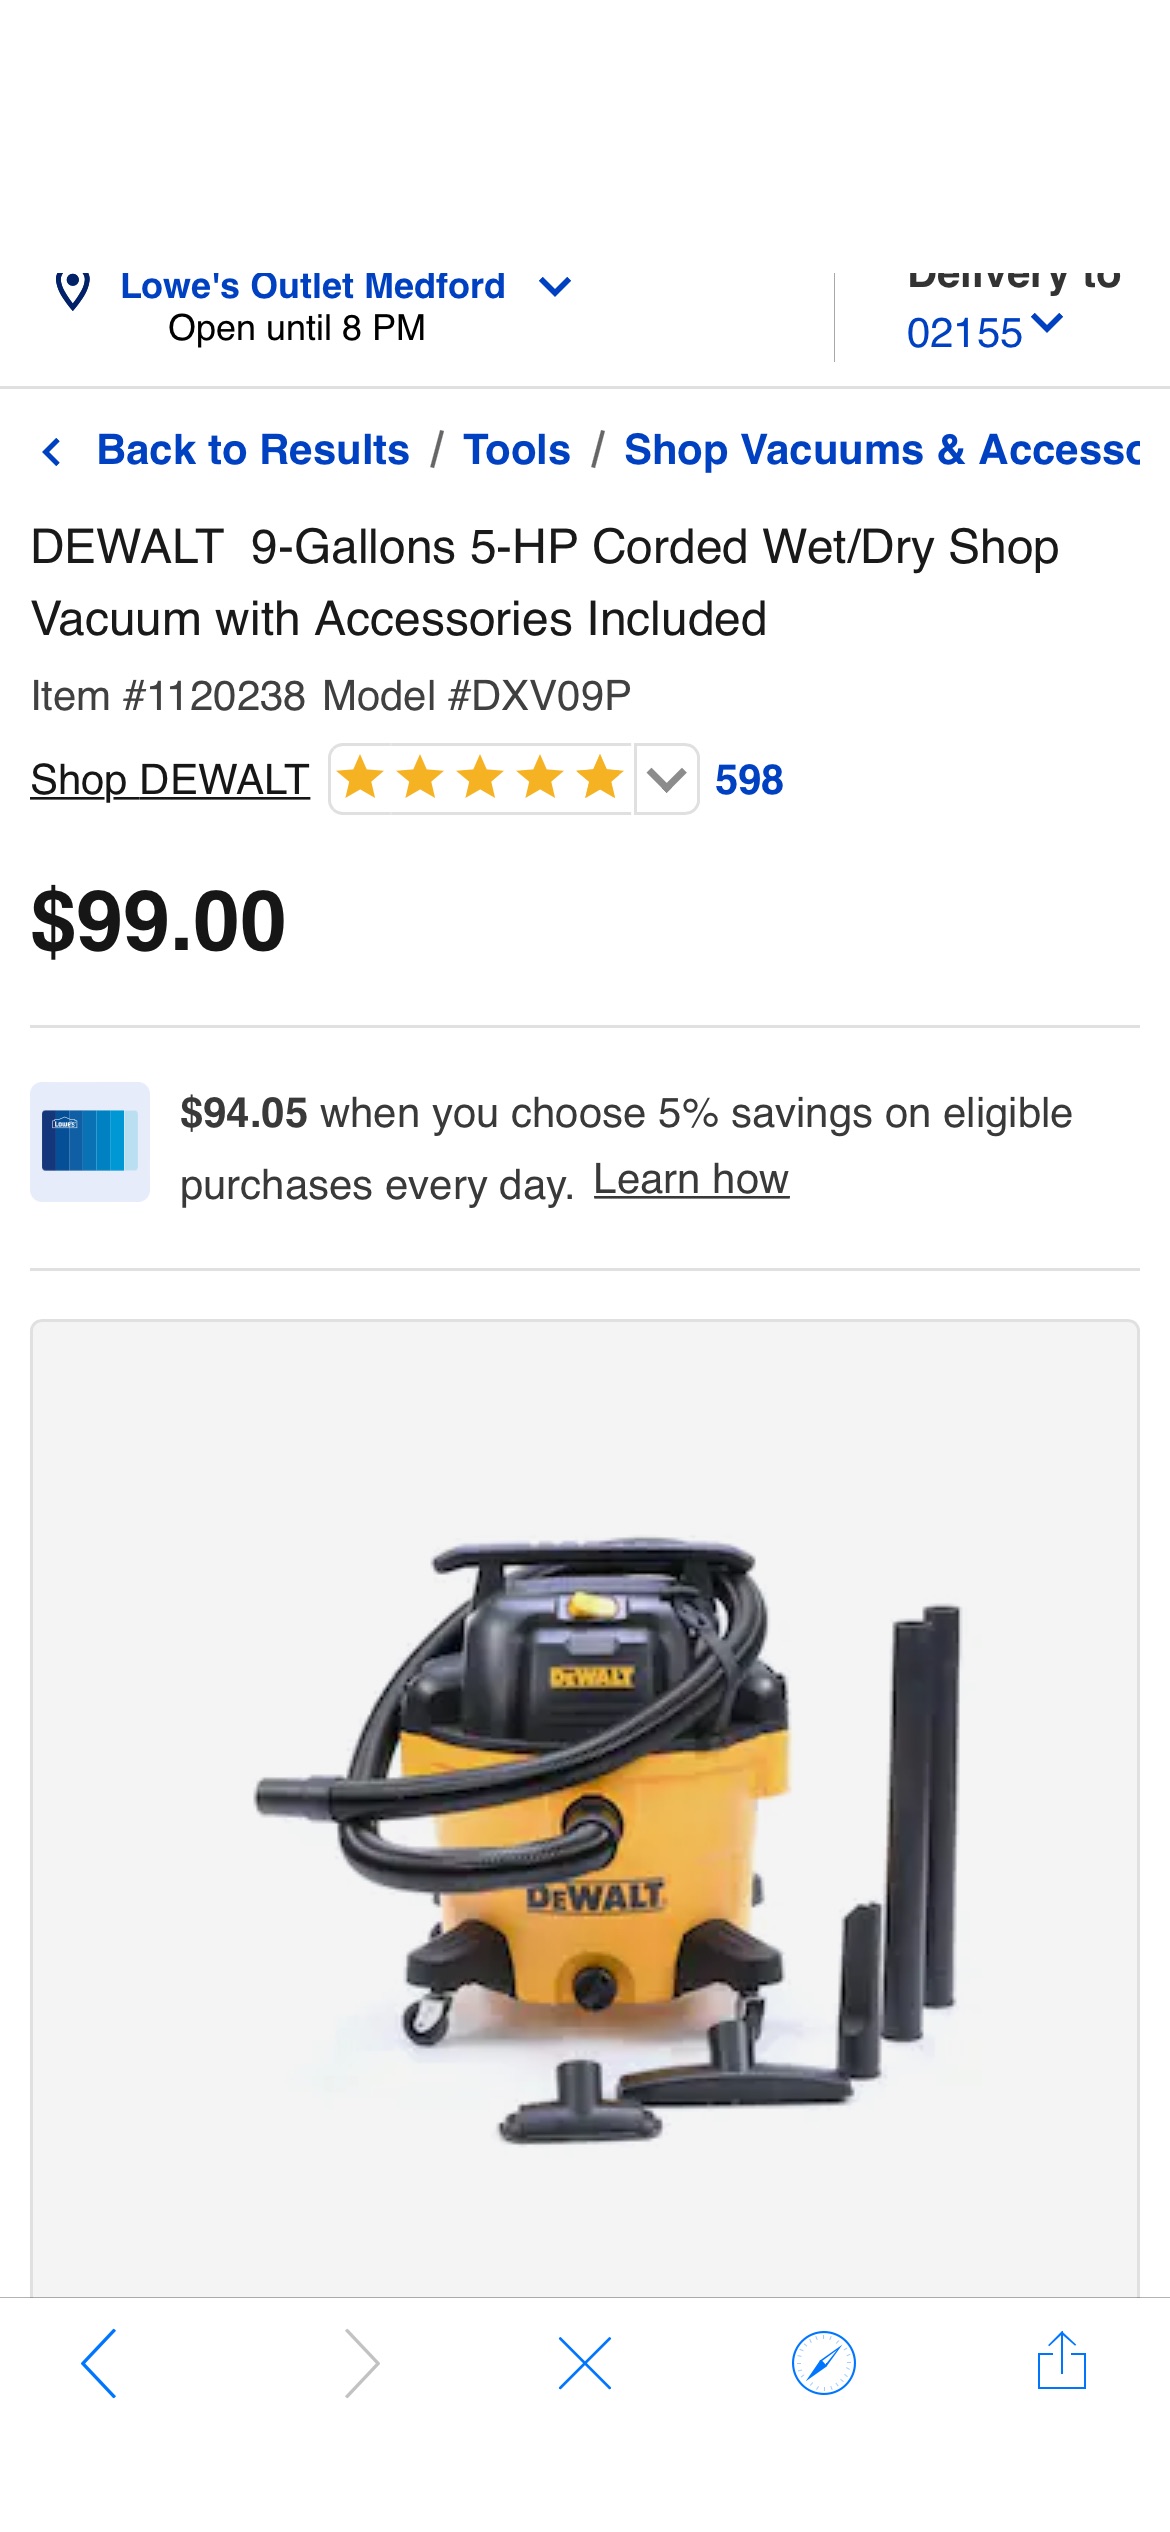 DEWALT 9-Gallons 5-HP Corded Wet/Dry Shop Vacuum with Accessories Included in the Shop Vacuums department at Lowes.com